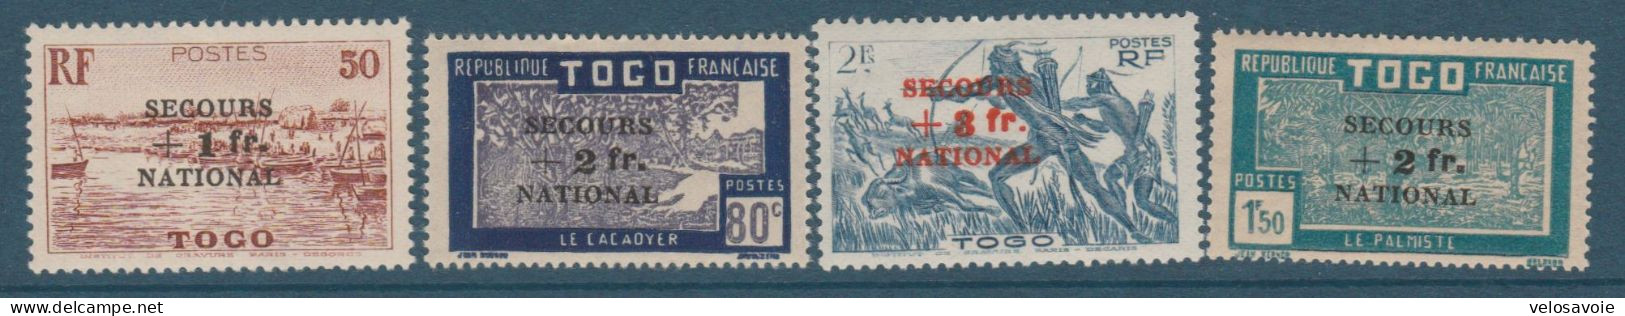 TOGO N° 211/214 SECOURS NATIONAL * - Neufs